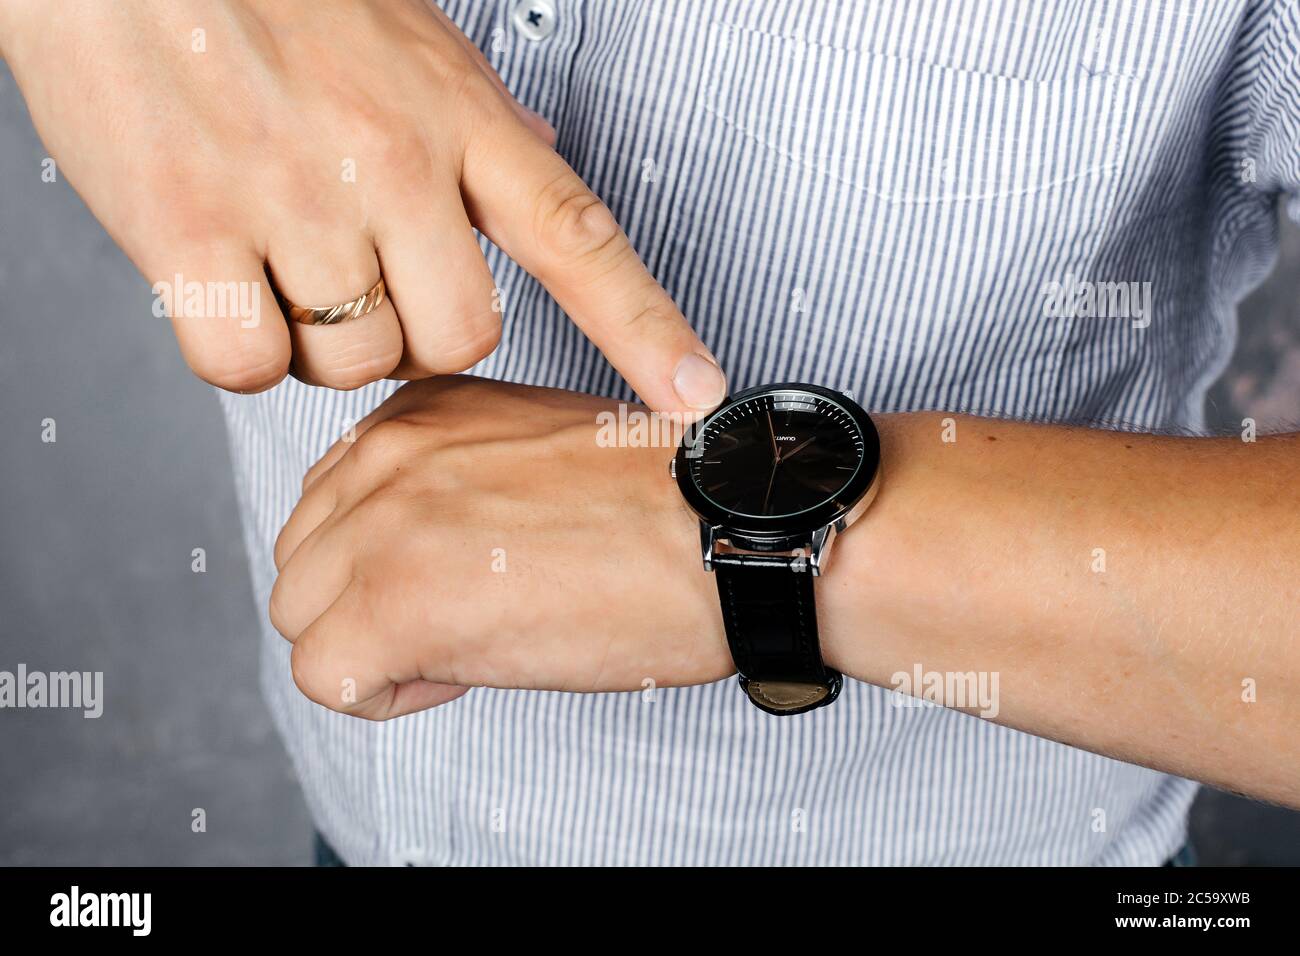 A man in a shirt points to a wristwatch Stock Photo